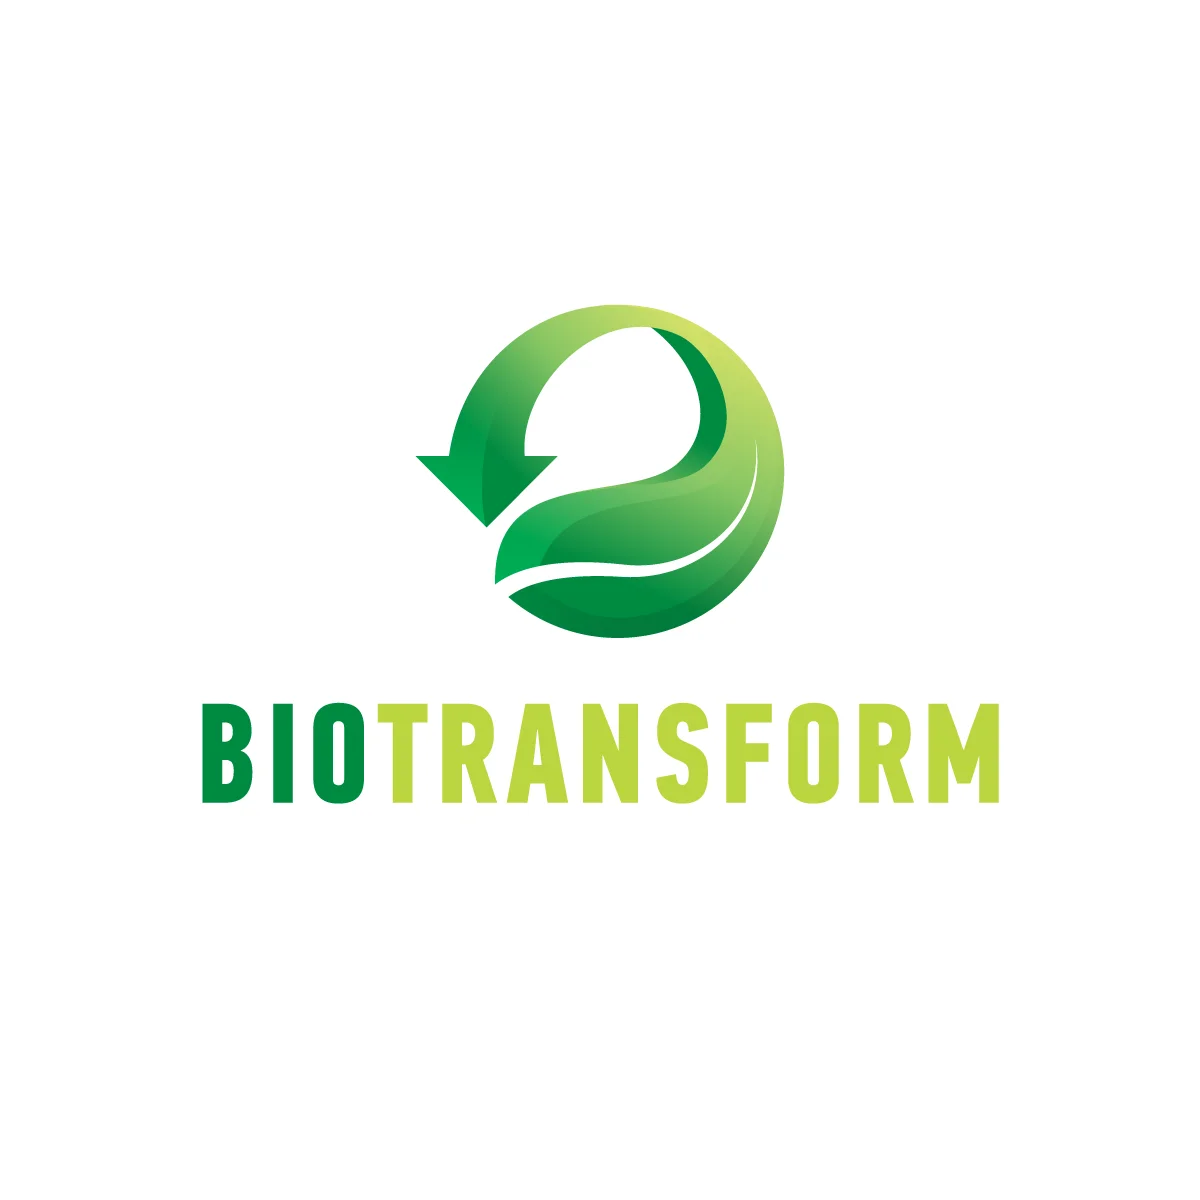 Go to the page of project -BIOTRANSFORM